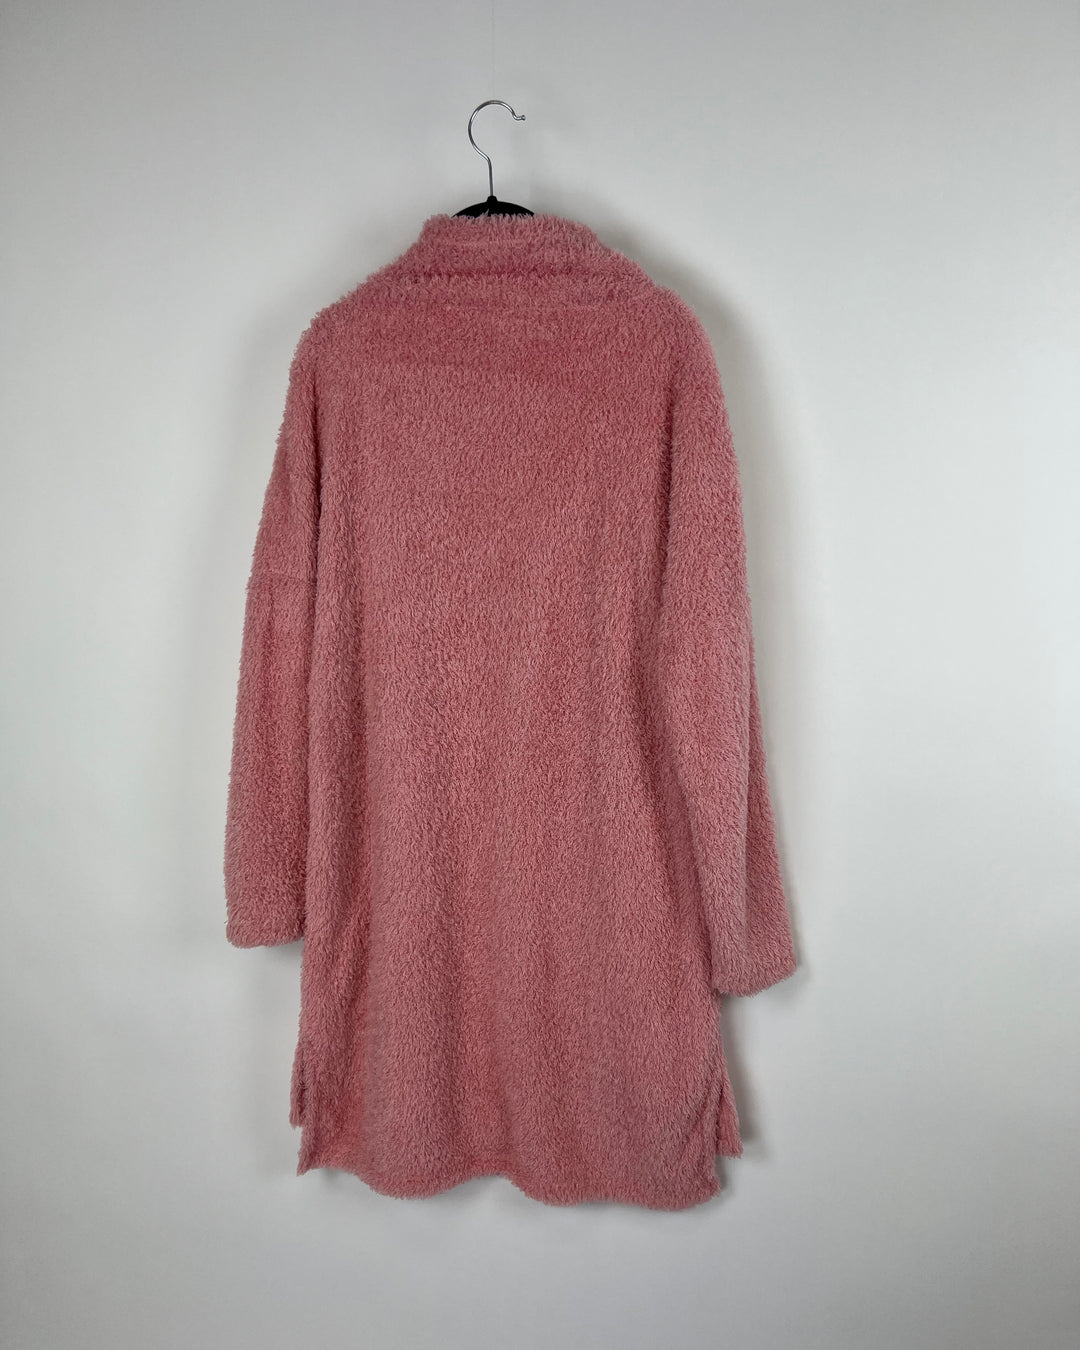 Oversized Pink Cozy Top - Small